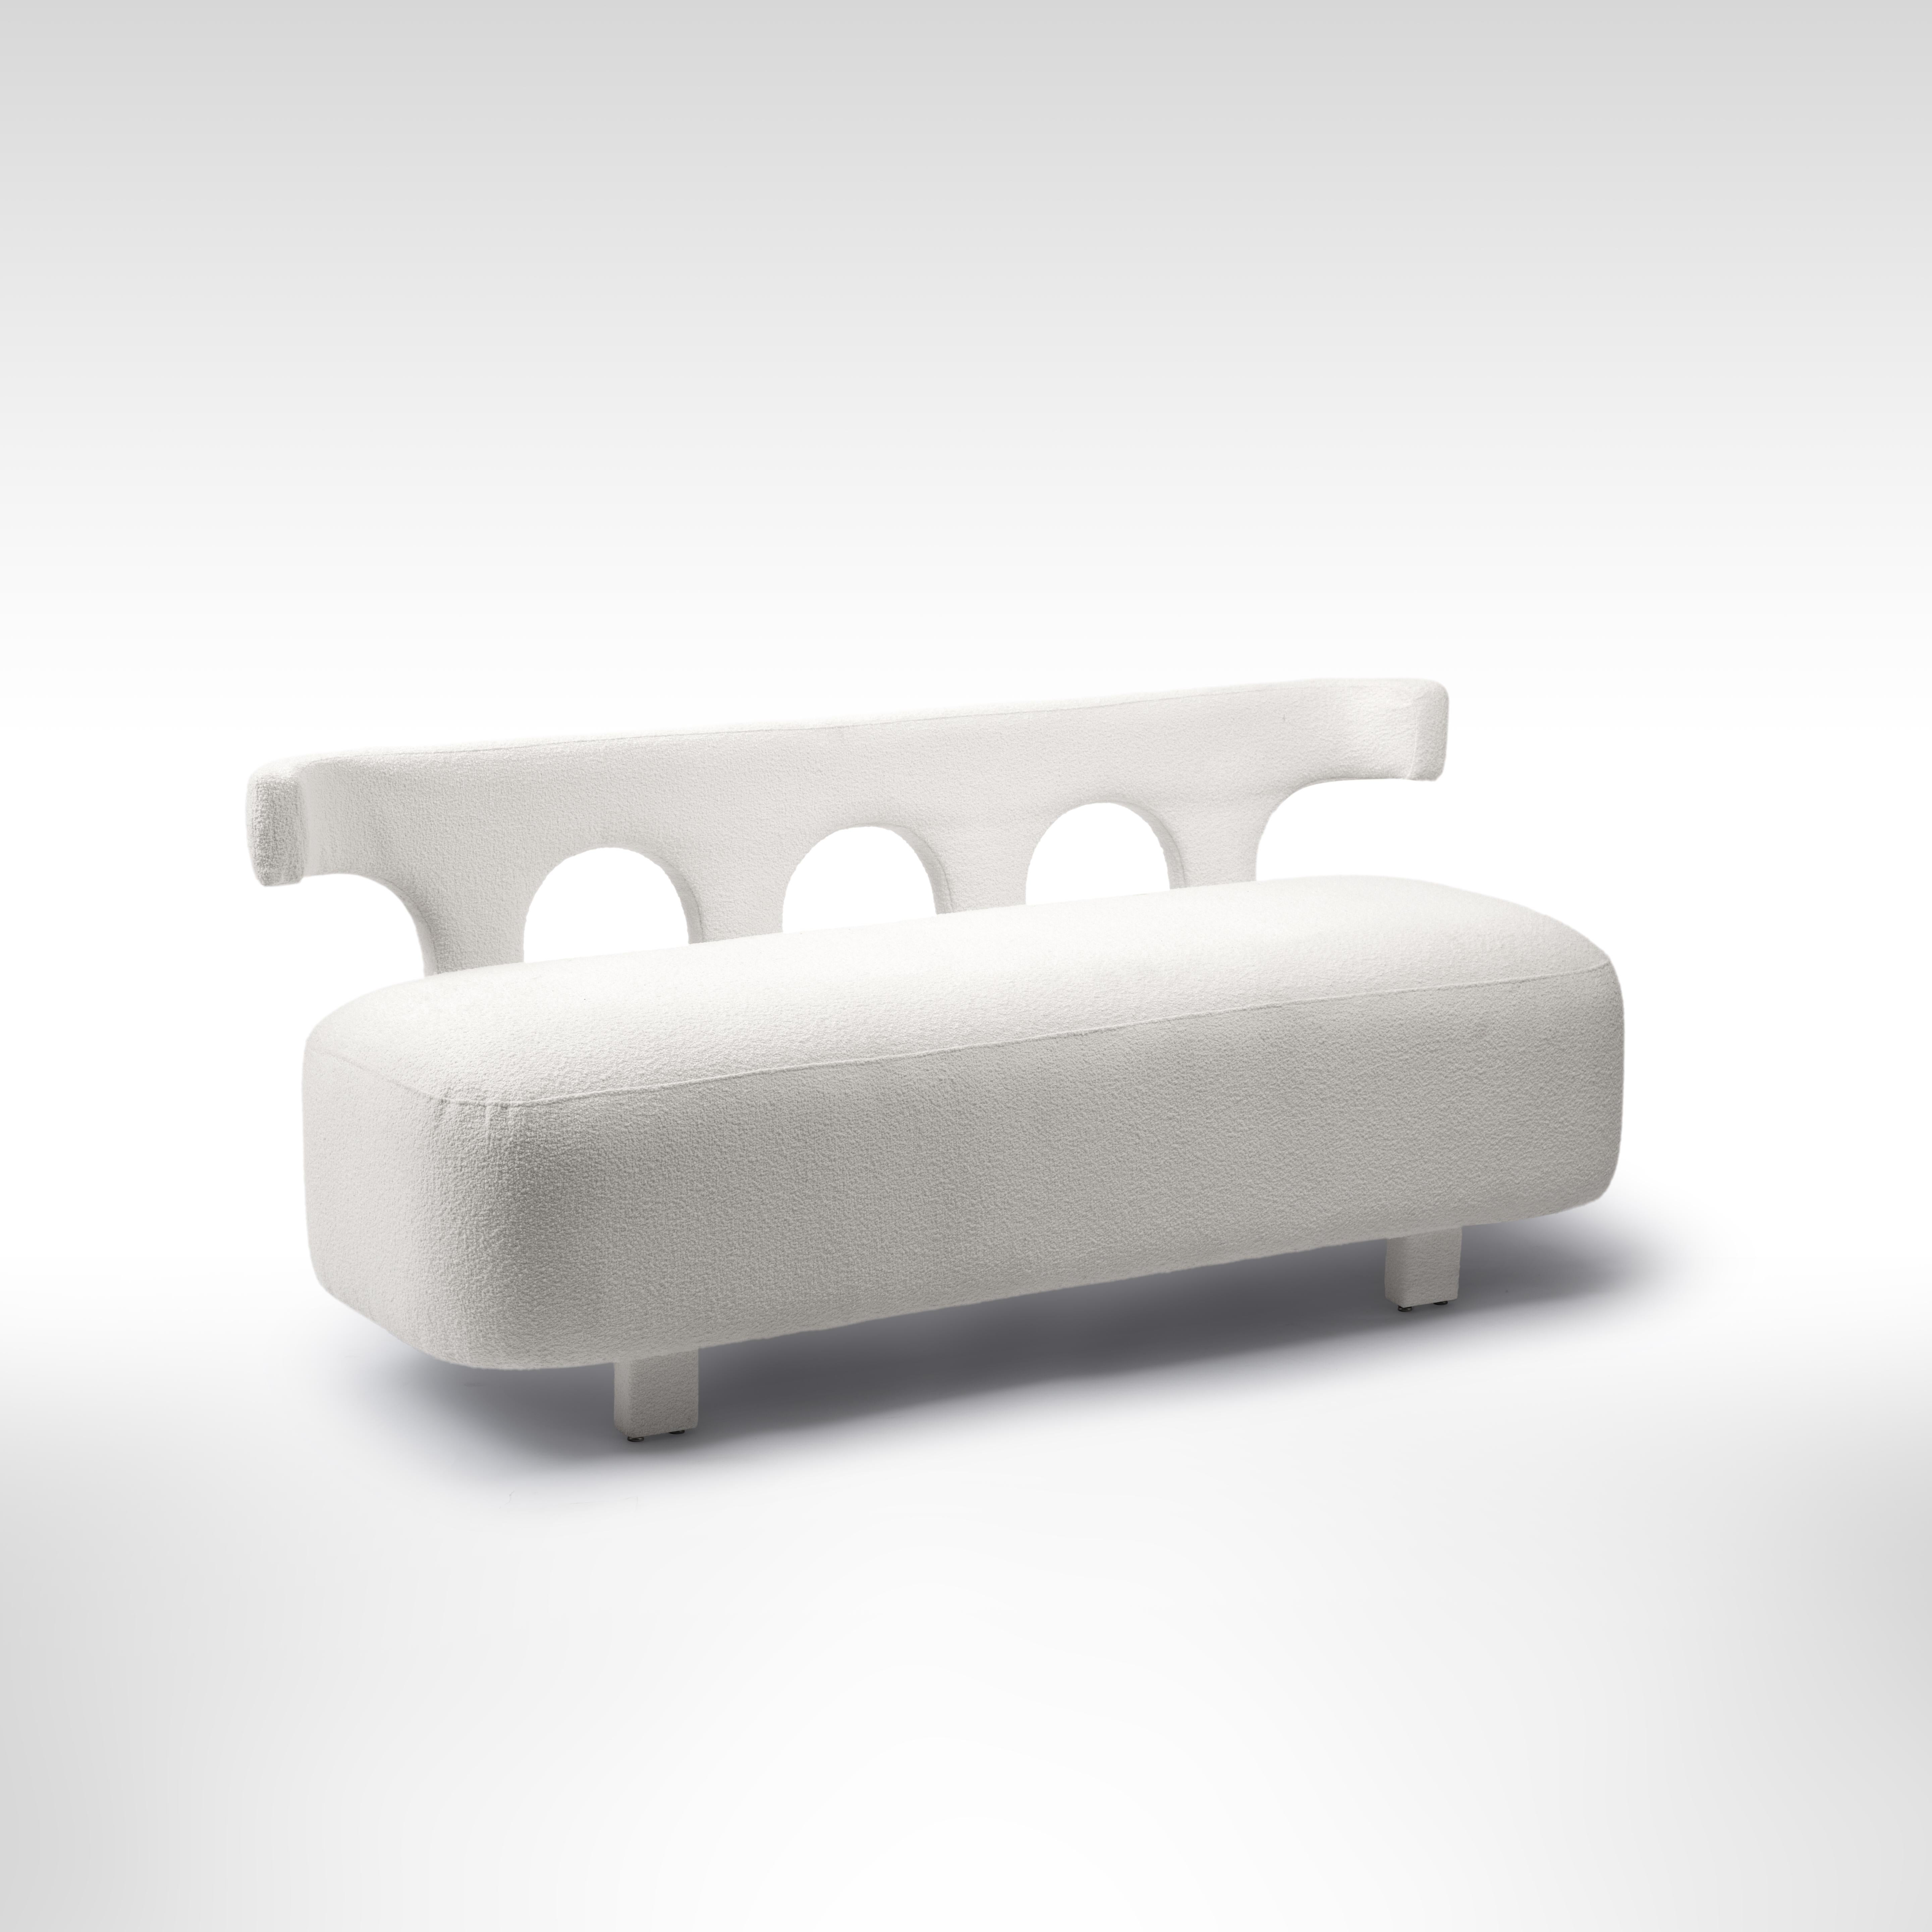 White curvy upholstered sofa inspired by Egypt's Nubian Architecture

The Nubia set is the heart of this Nubian collection. Nubian houses are typically built for entire families and are known for having an outdoor central courtyard where the